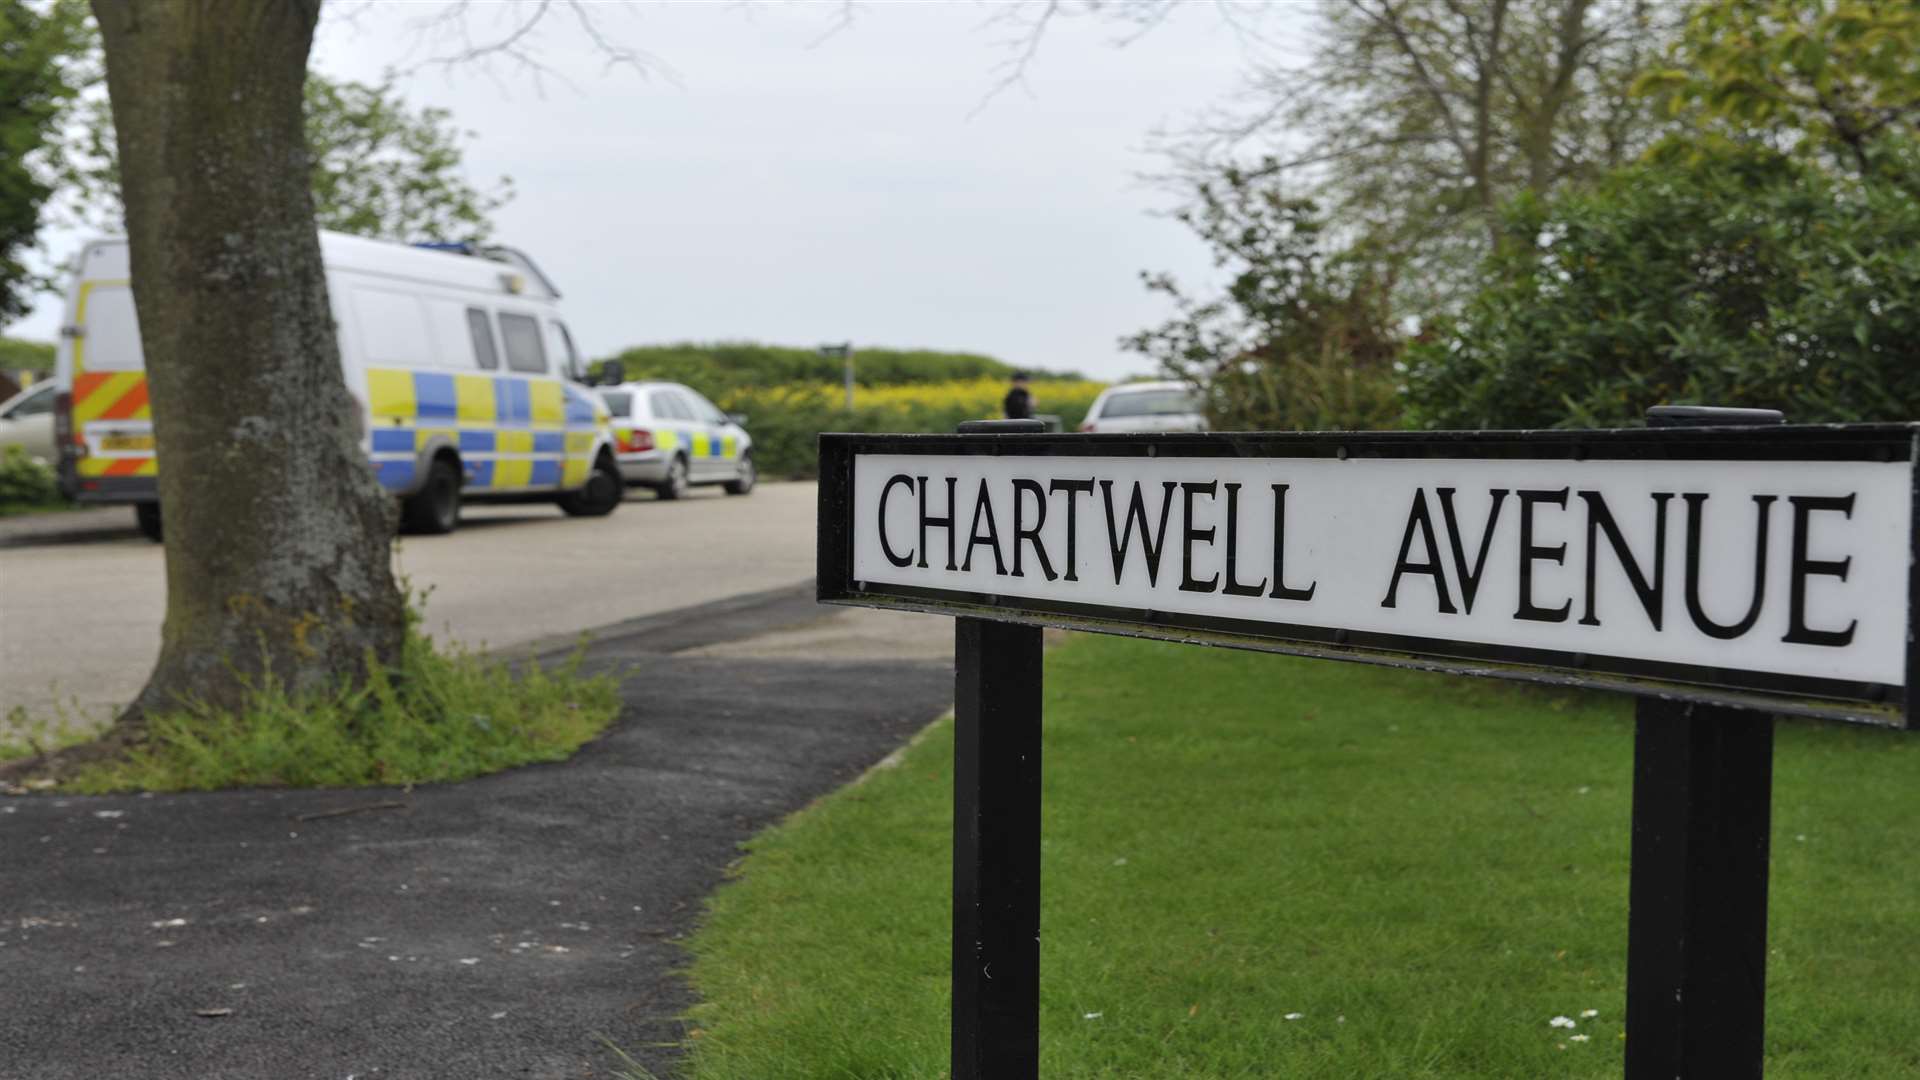 A body was fond in a ditch off a footpath in Chartwell Avenue. Picture: Tony Flashman